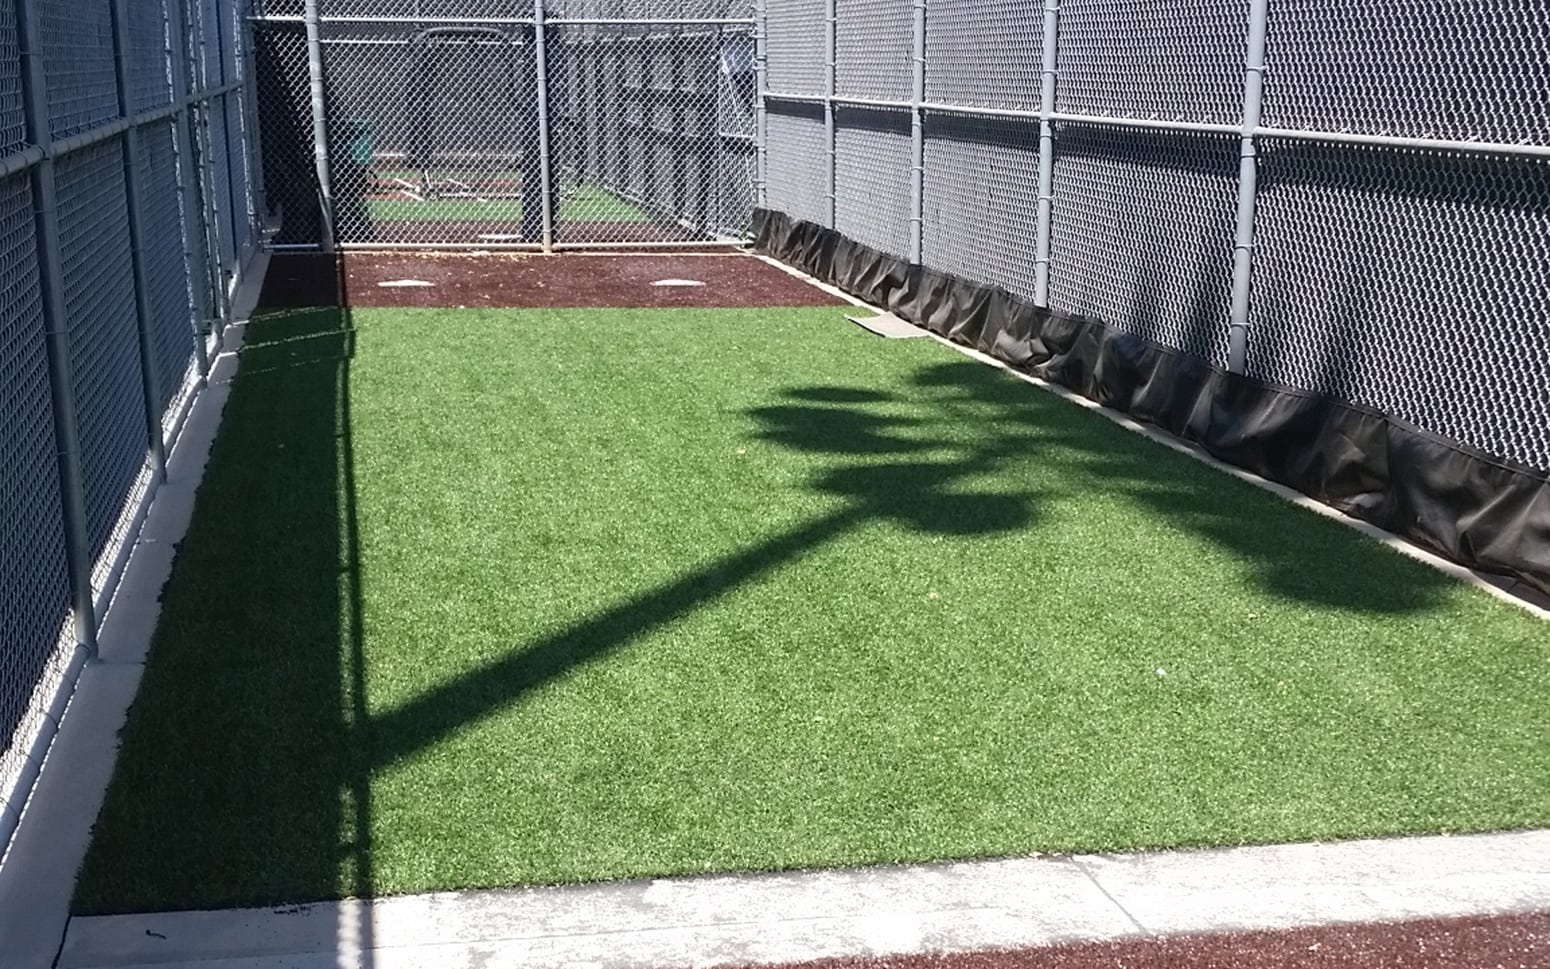 Batting cage with synthetic turf